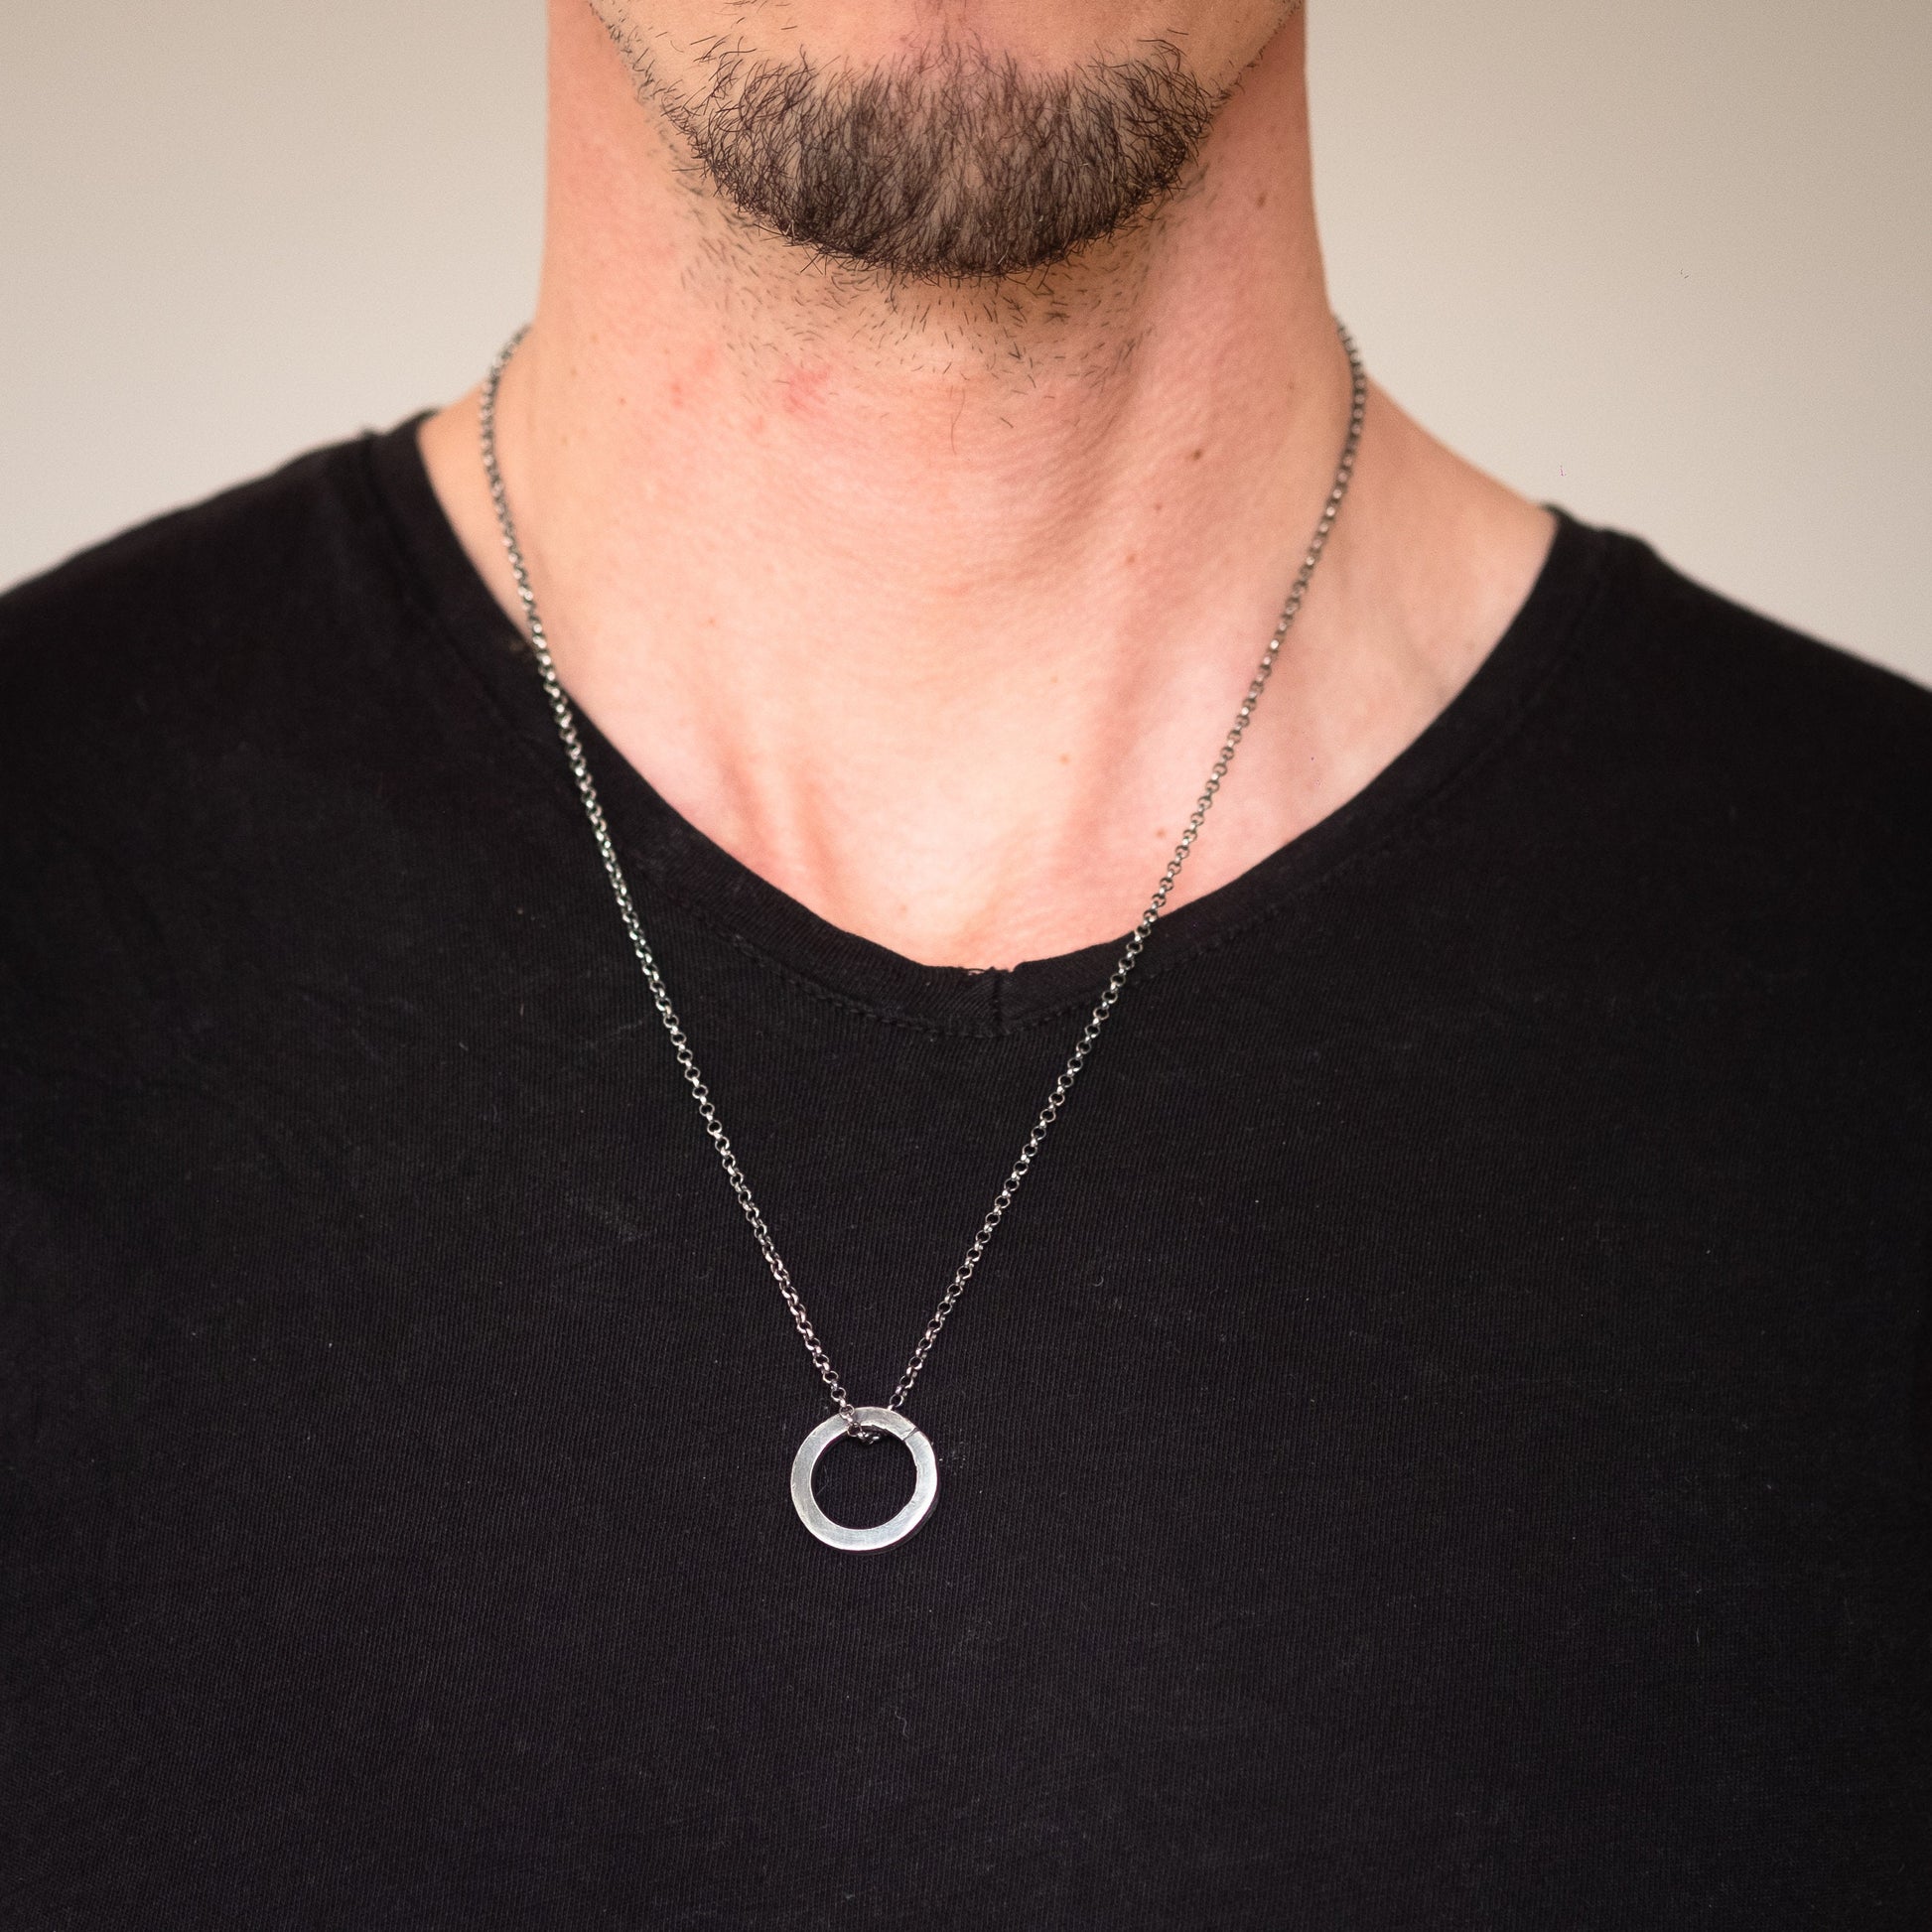 Mens Circle mens necklace, Minimalist Protection amulet, Viking Handmade Silver jewelry, Unique Gift for women, Boyfriend gift